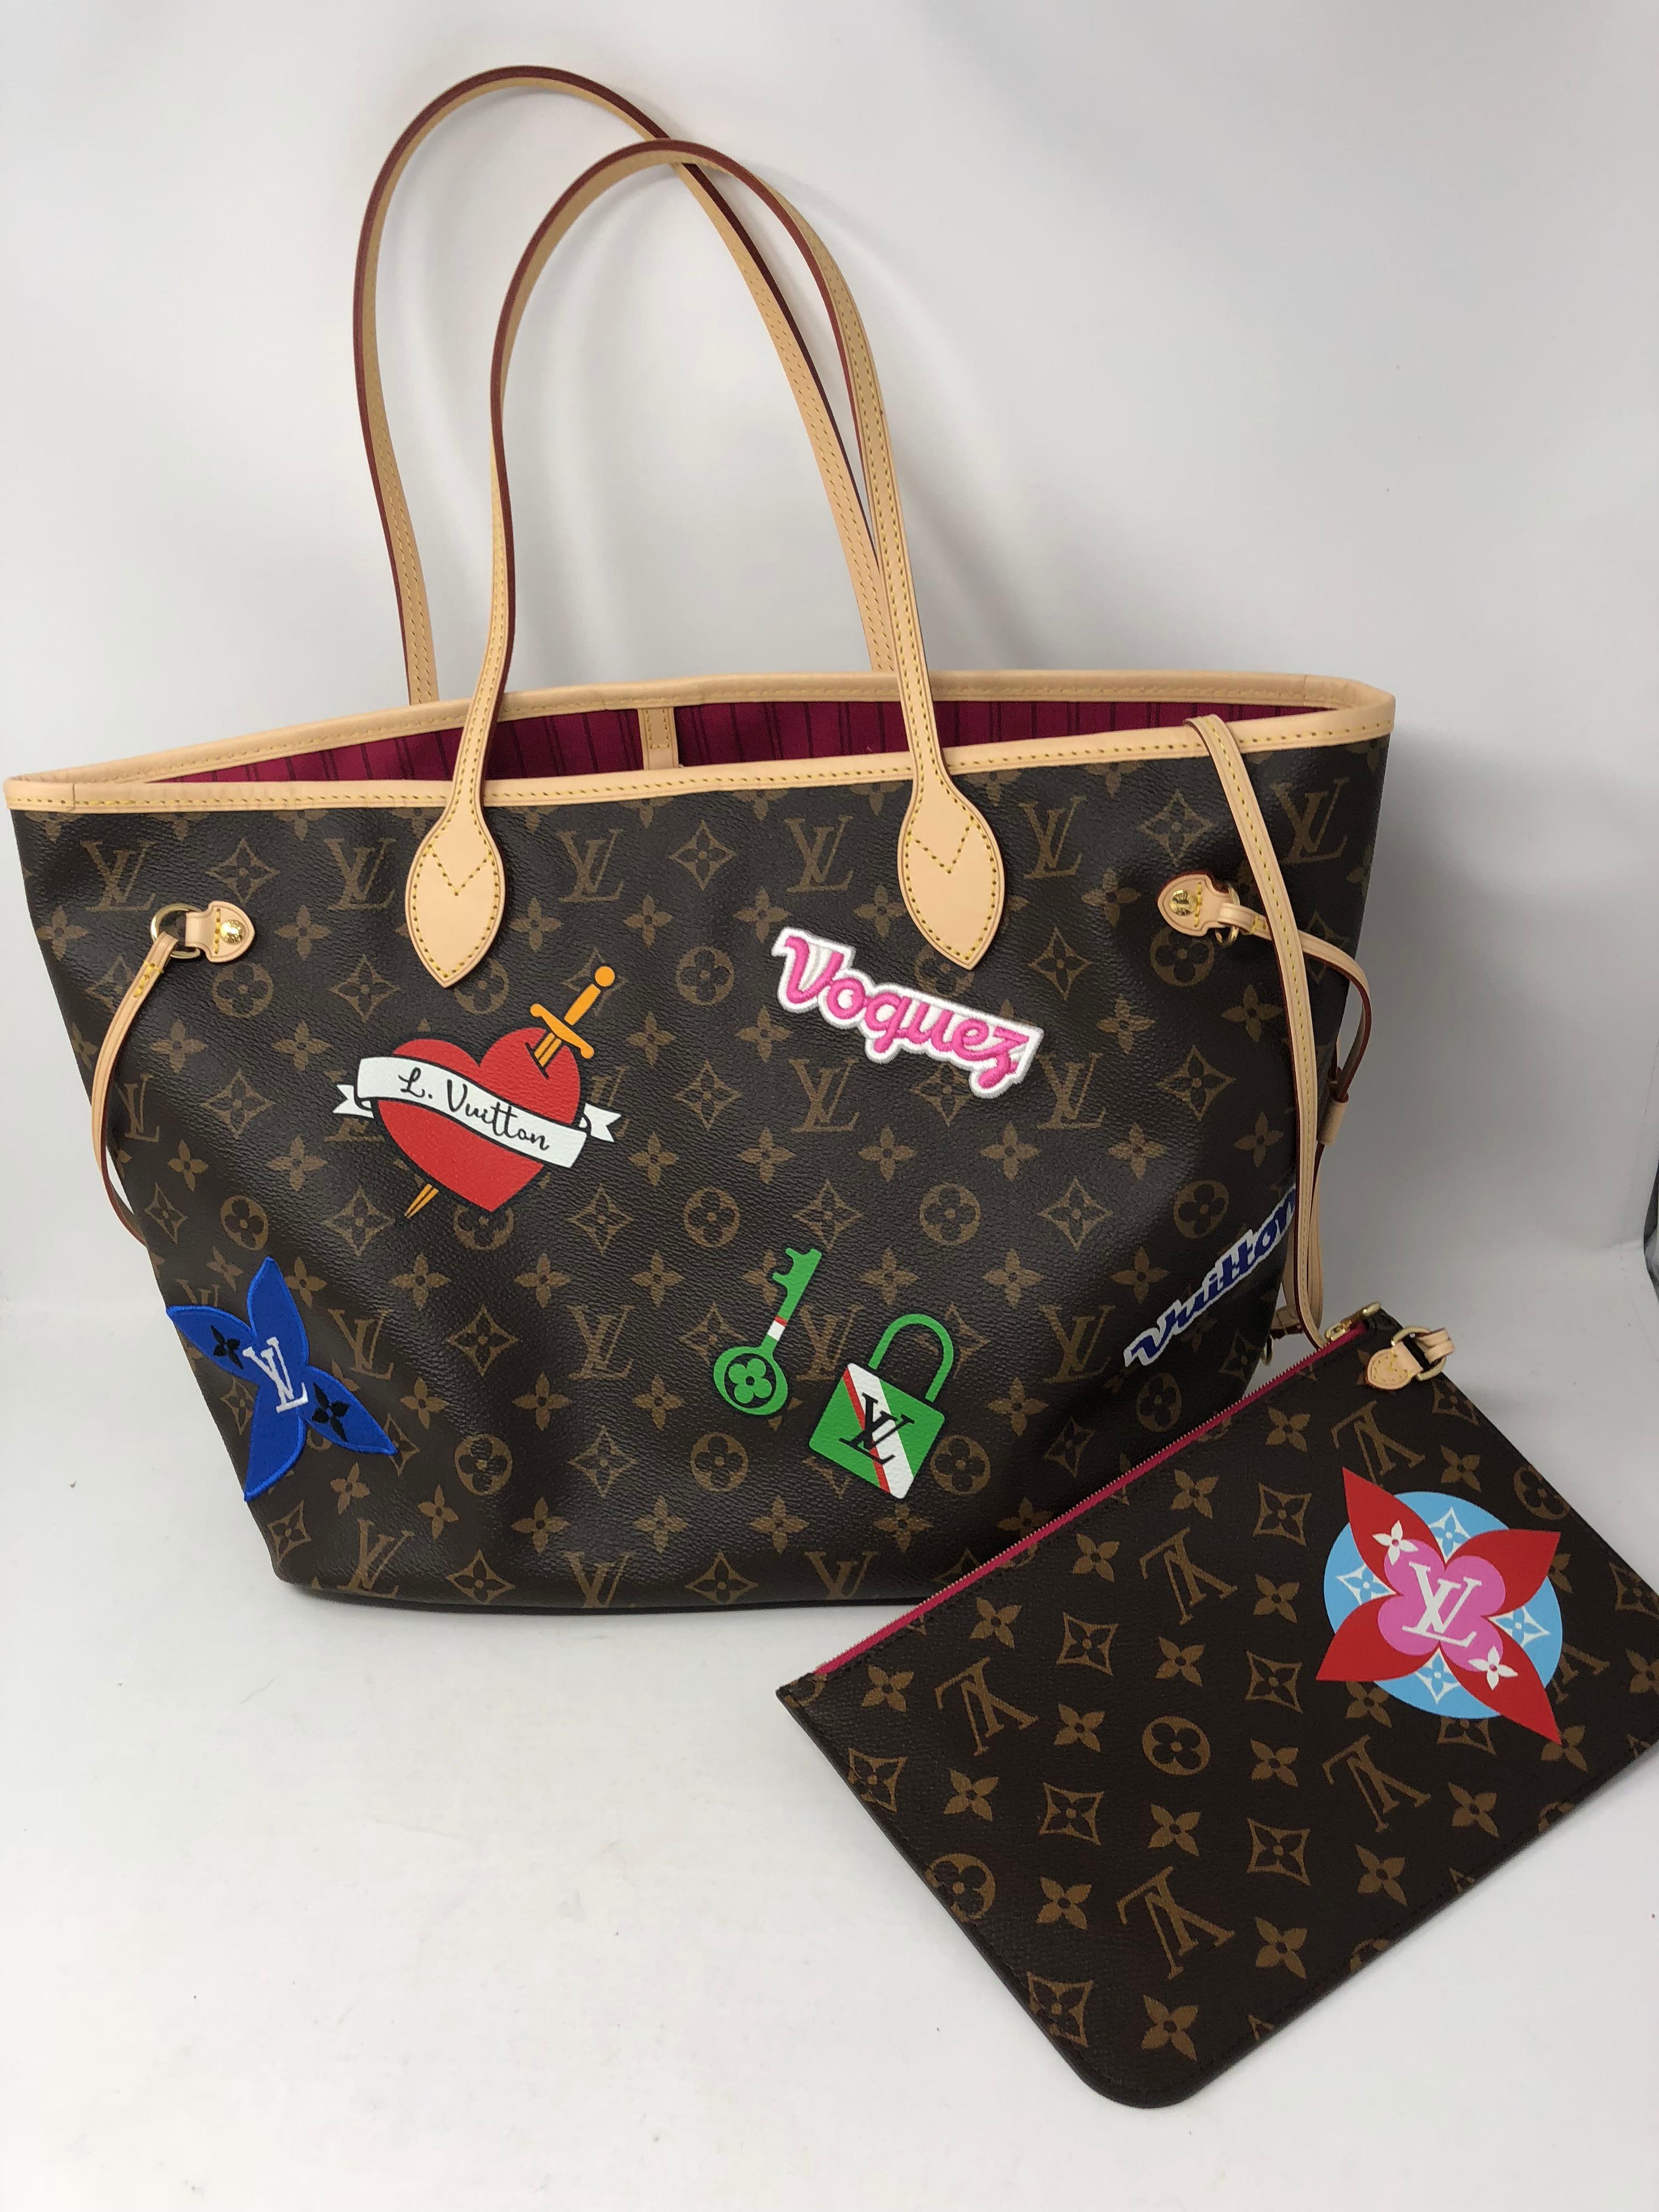 Louis Vuitton Neverfull Travel Patches Collection 2018. This limited edition tote is brand new and comes with dust cover and matching pouch insert. Neverfull is the MM size and has fuschia interior. Add this one to your collection. Guaranteed